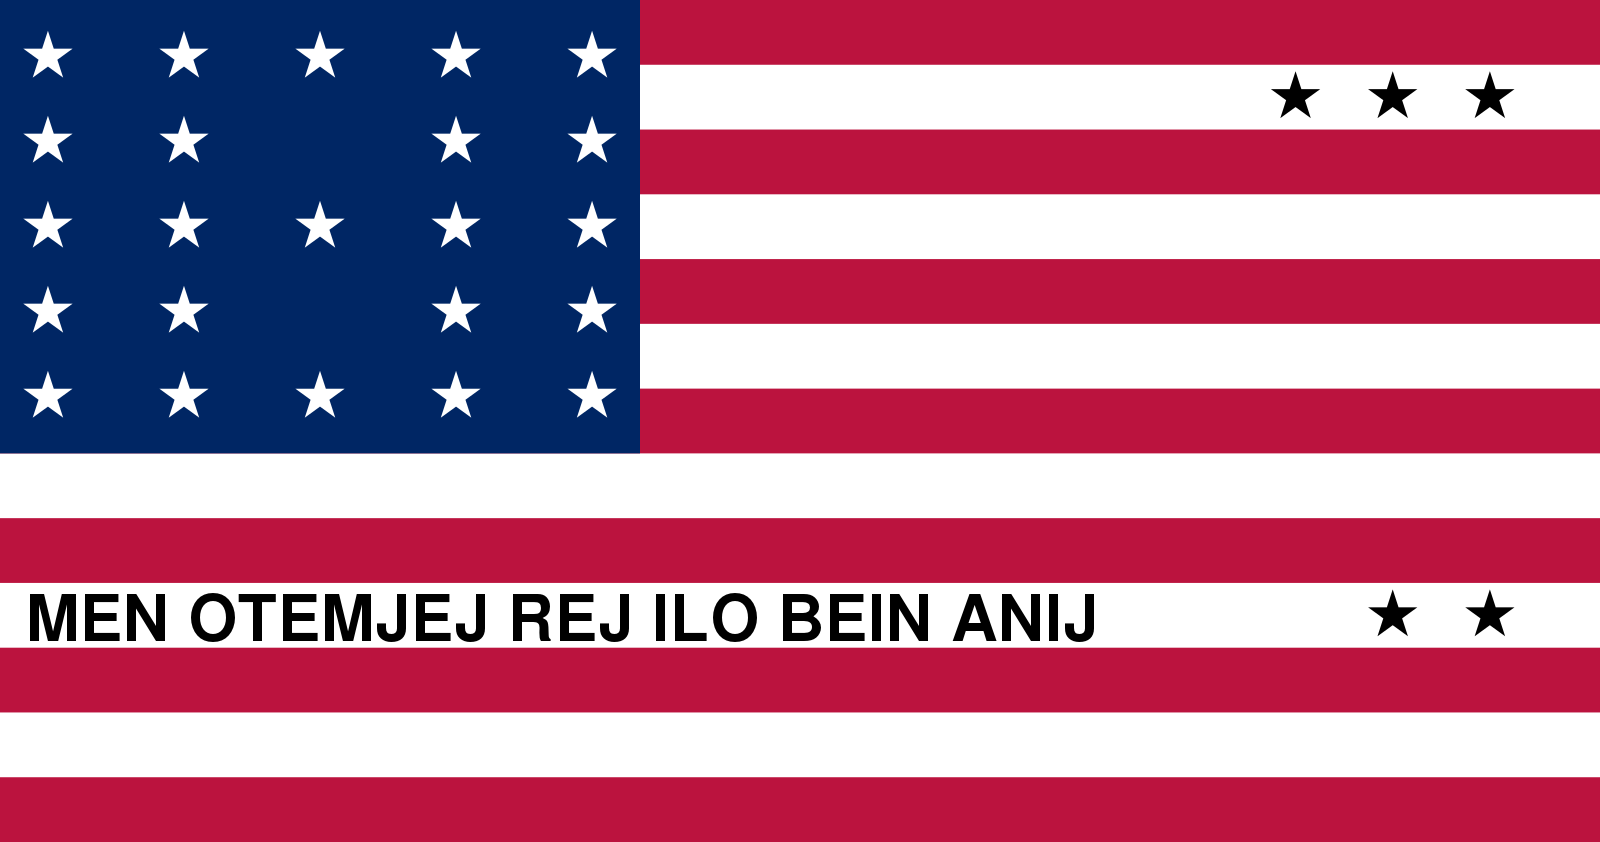 Flag with red and white stripes, and black stars; a blue square in the top left with white stars; and the words "MEN OTEMJEJ REJ ILO BEIN ANIJ."